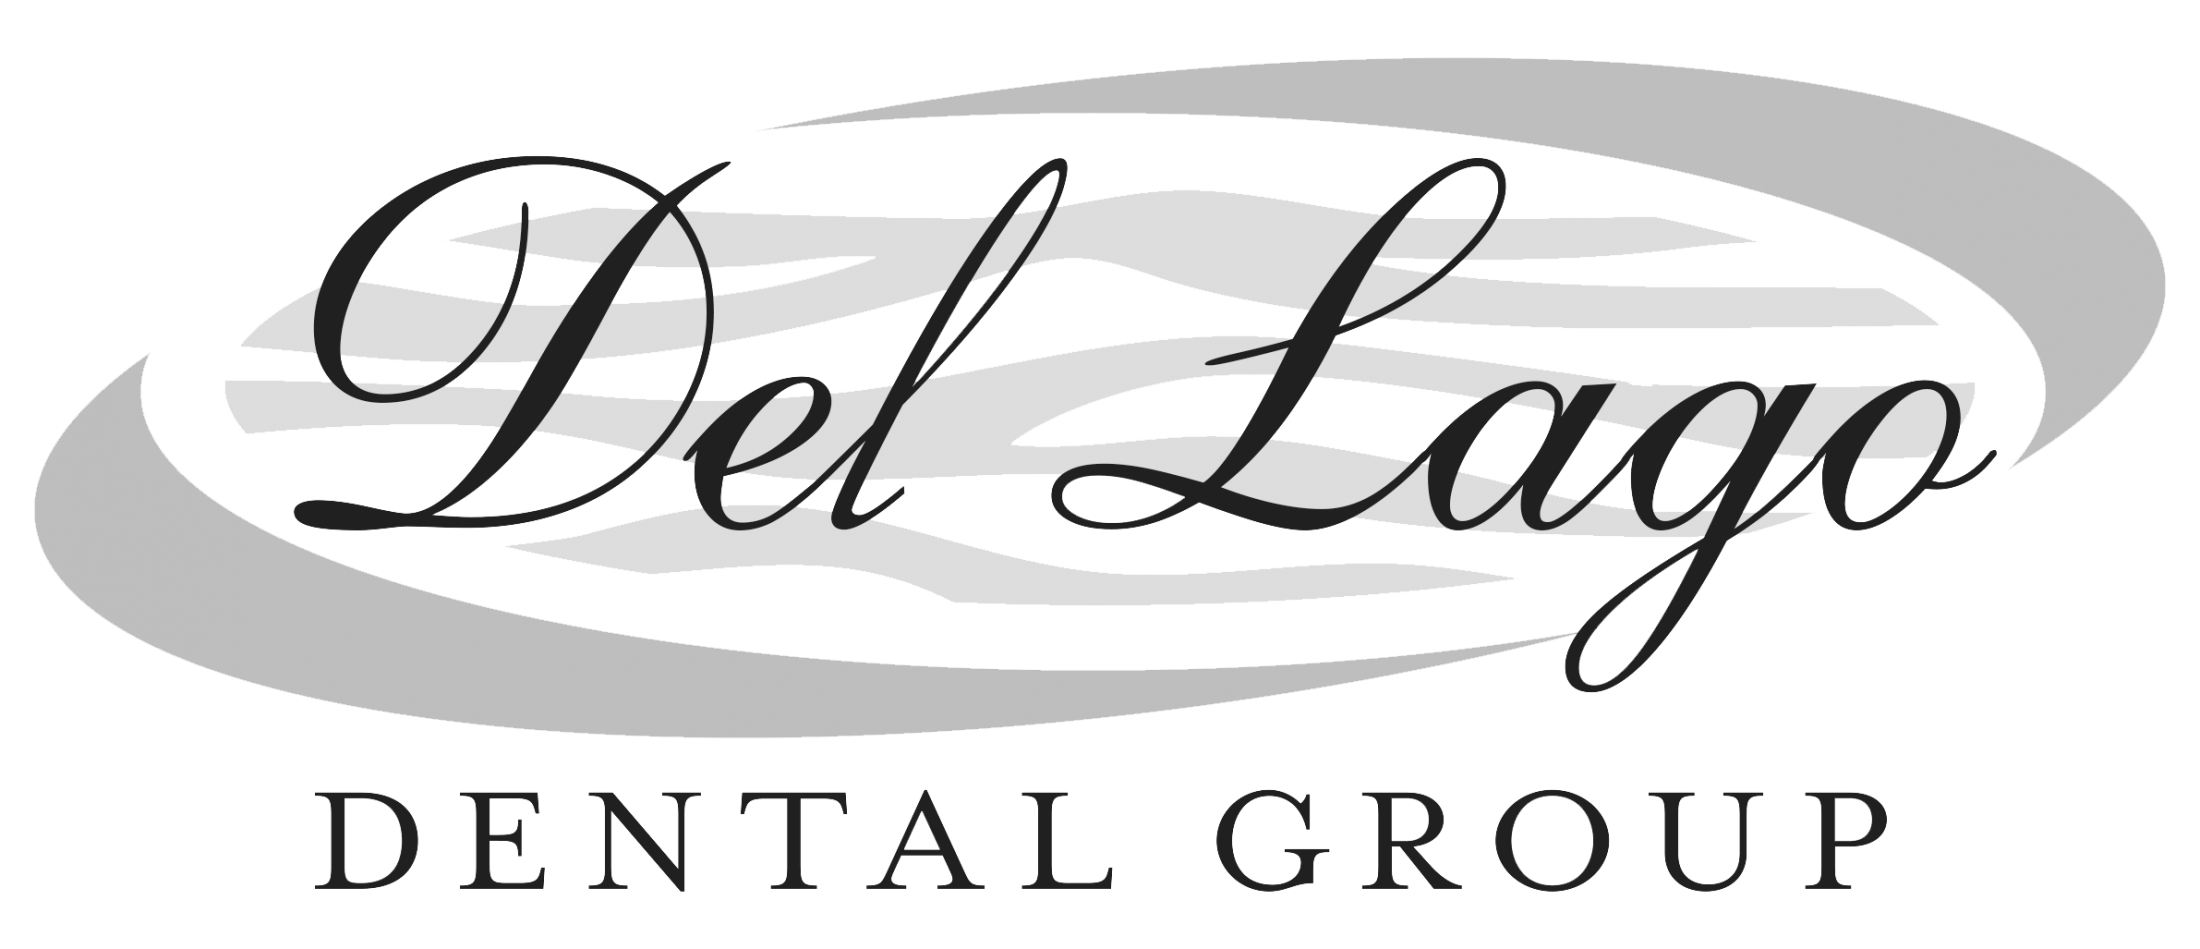 Link to Del Lago Dental Group home page